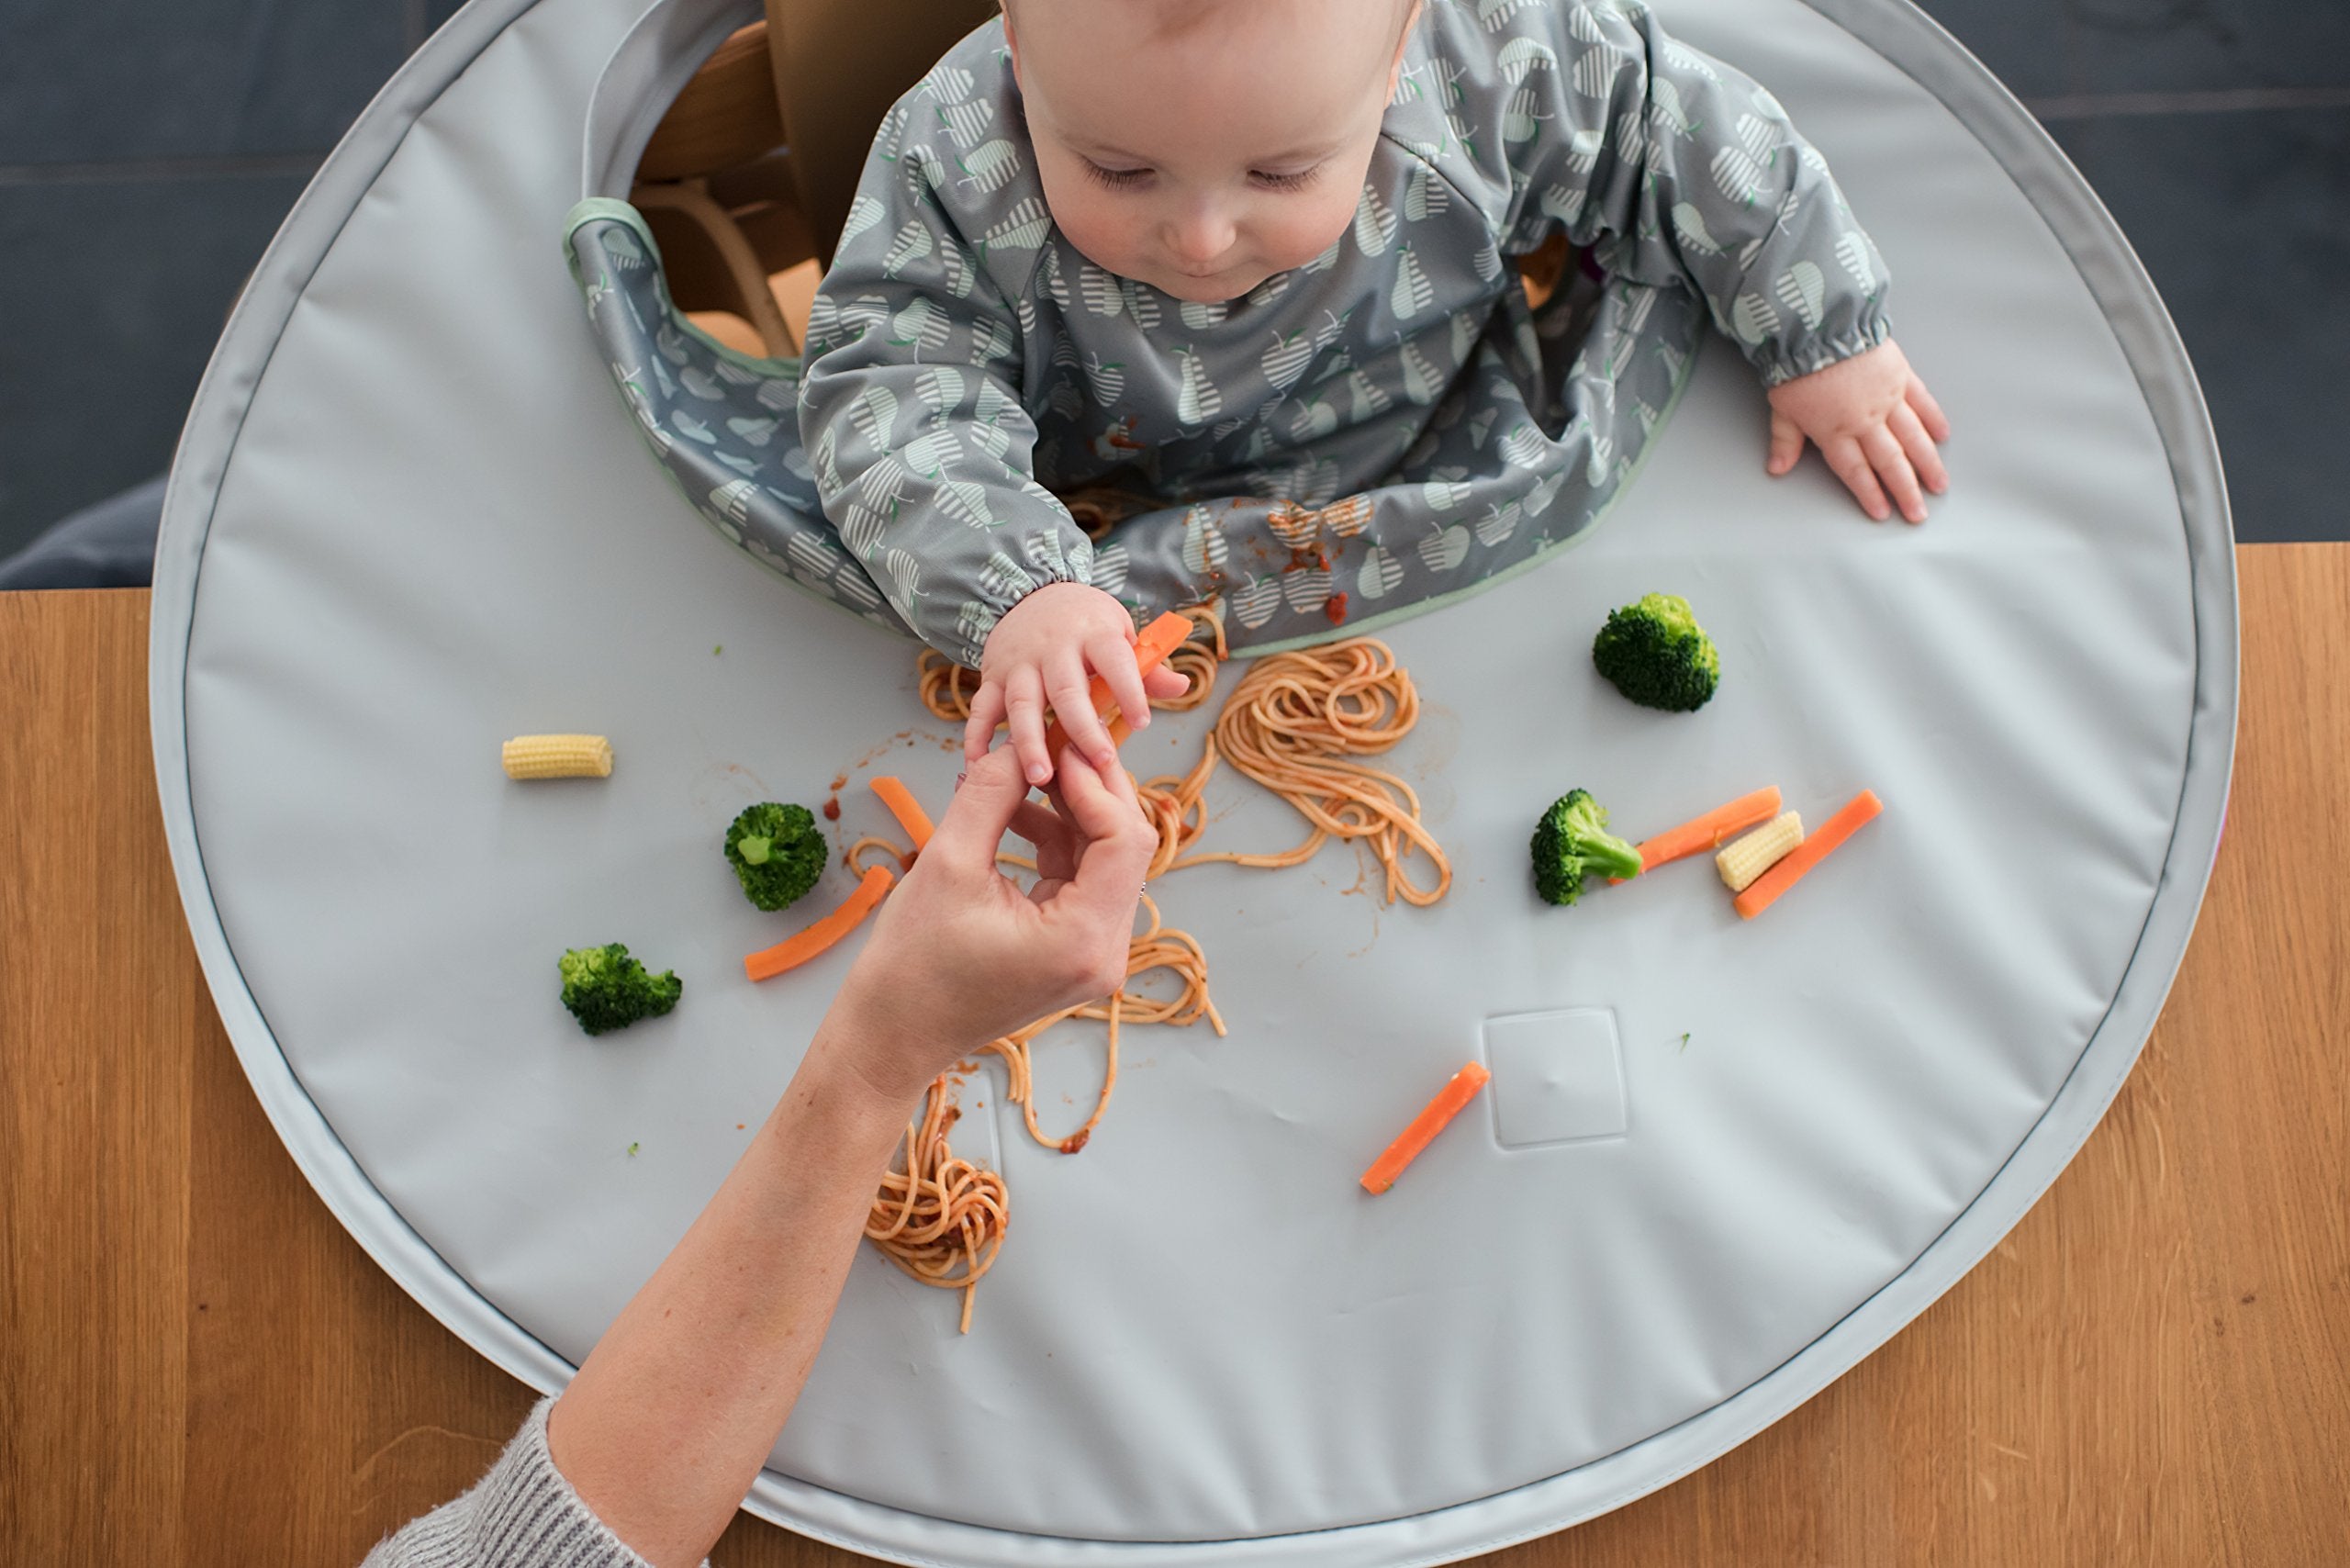 Official Distributor] Additional Bib for For Tidy Tot Bib & Tray Weaning  Kit Baby Led Weaning Mealtime